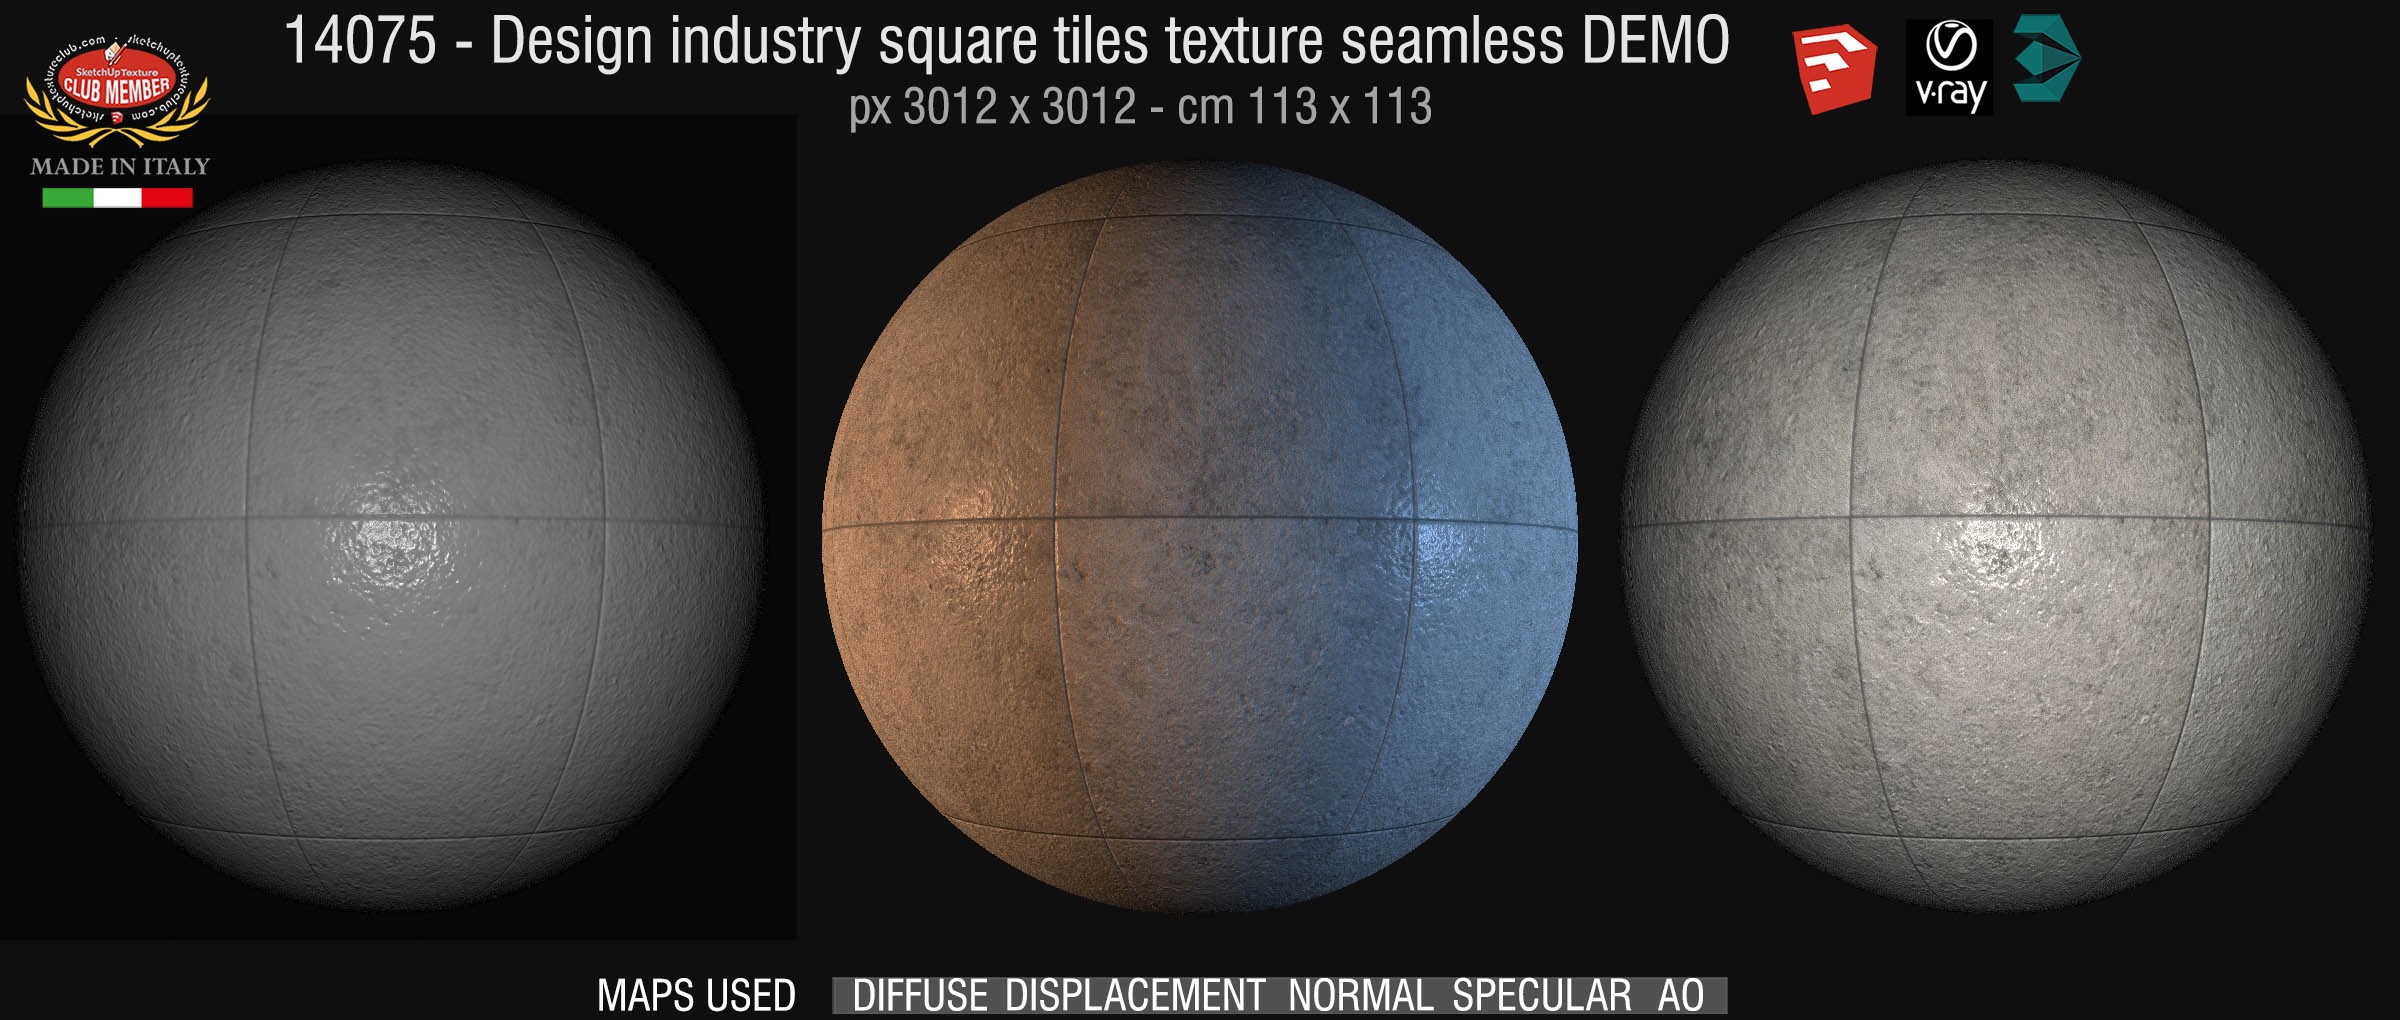 14075 Design industry square tile texture seamless + maps DEMO